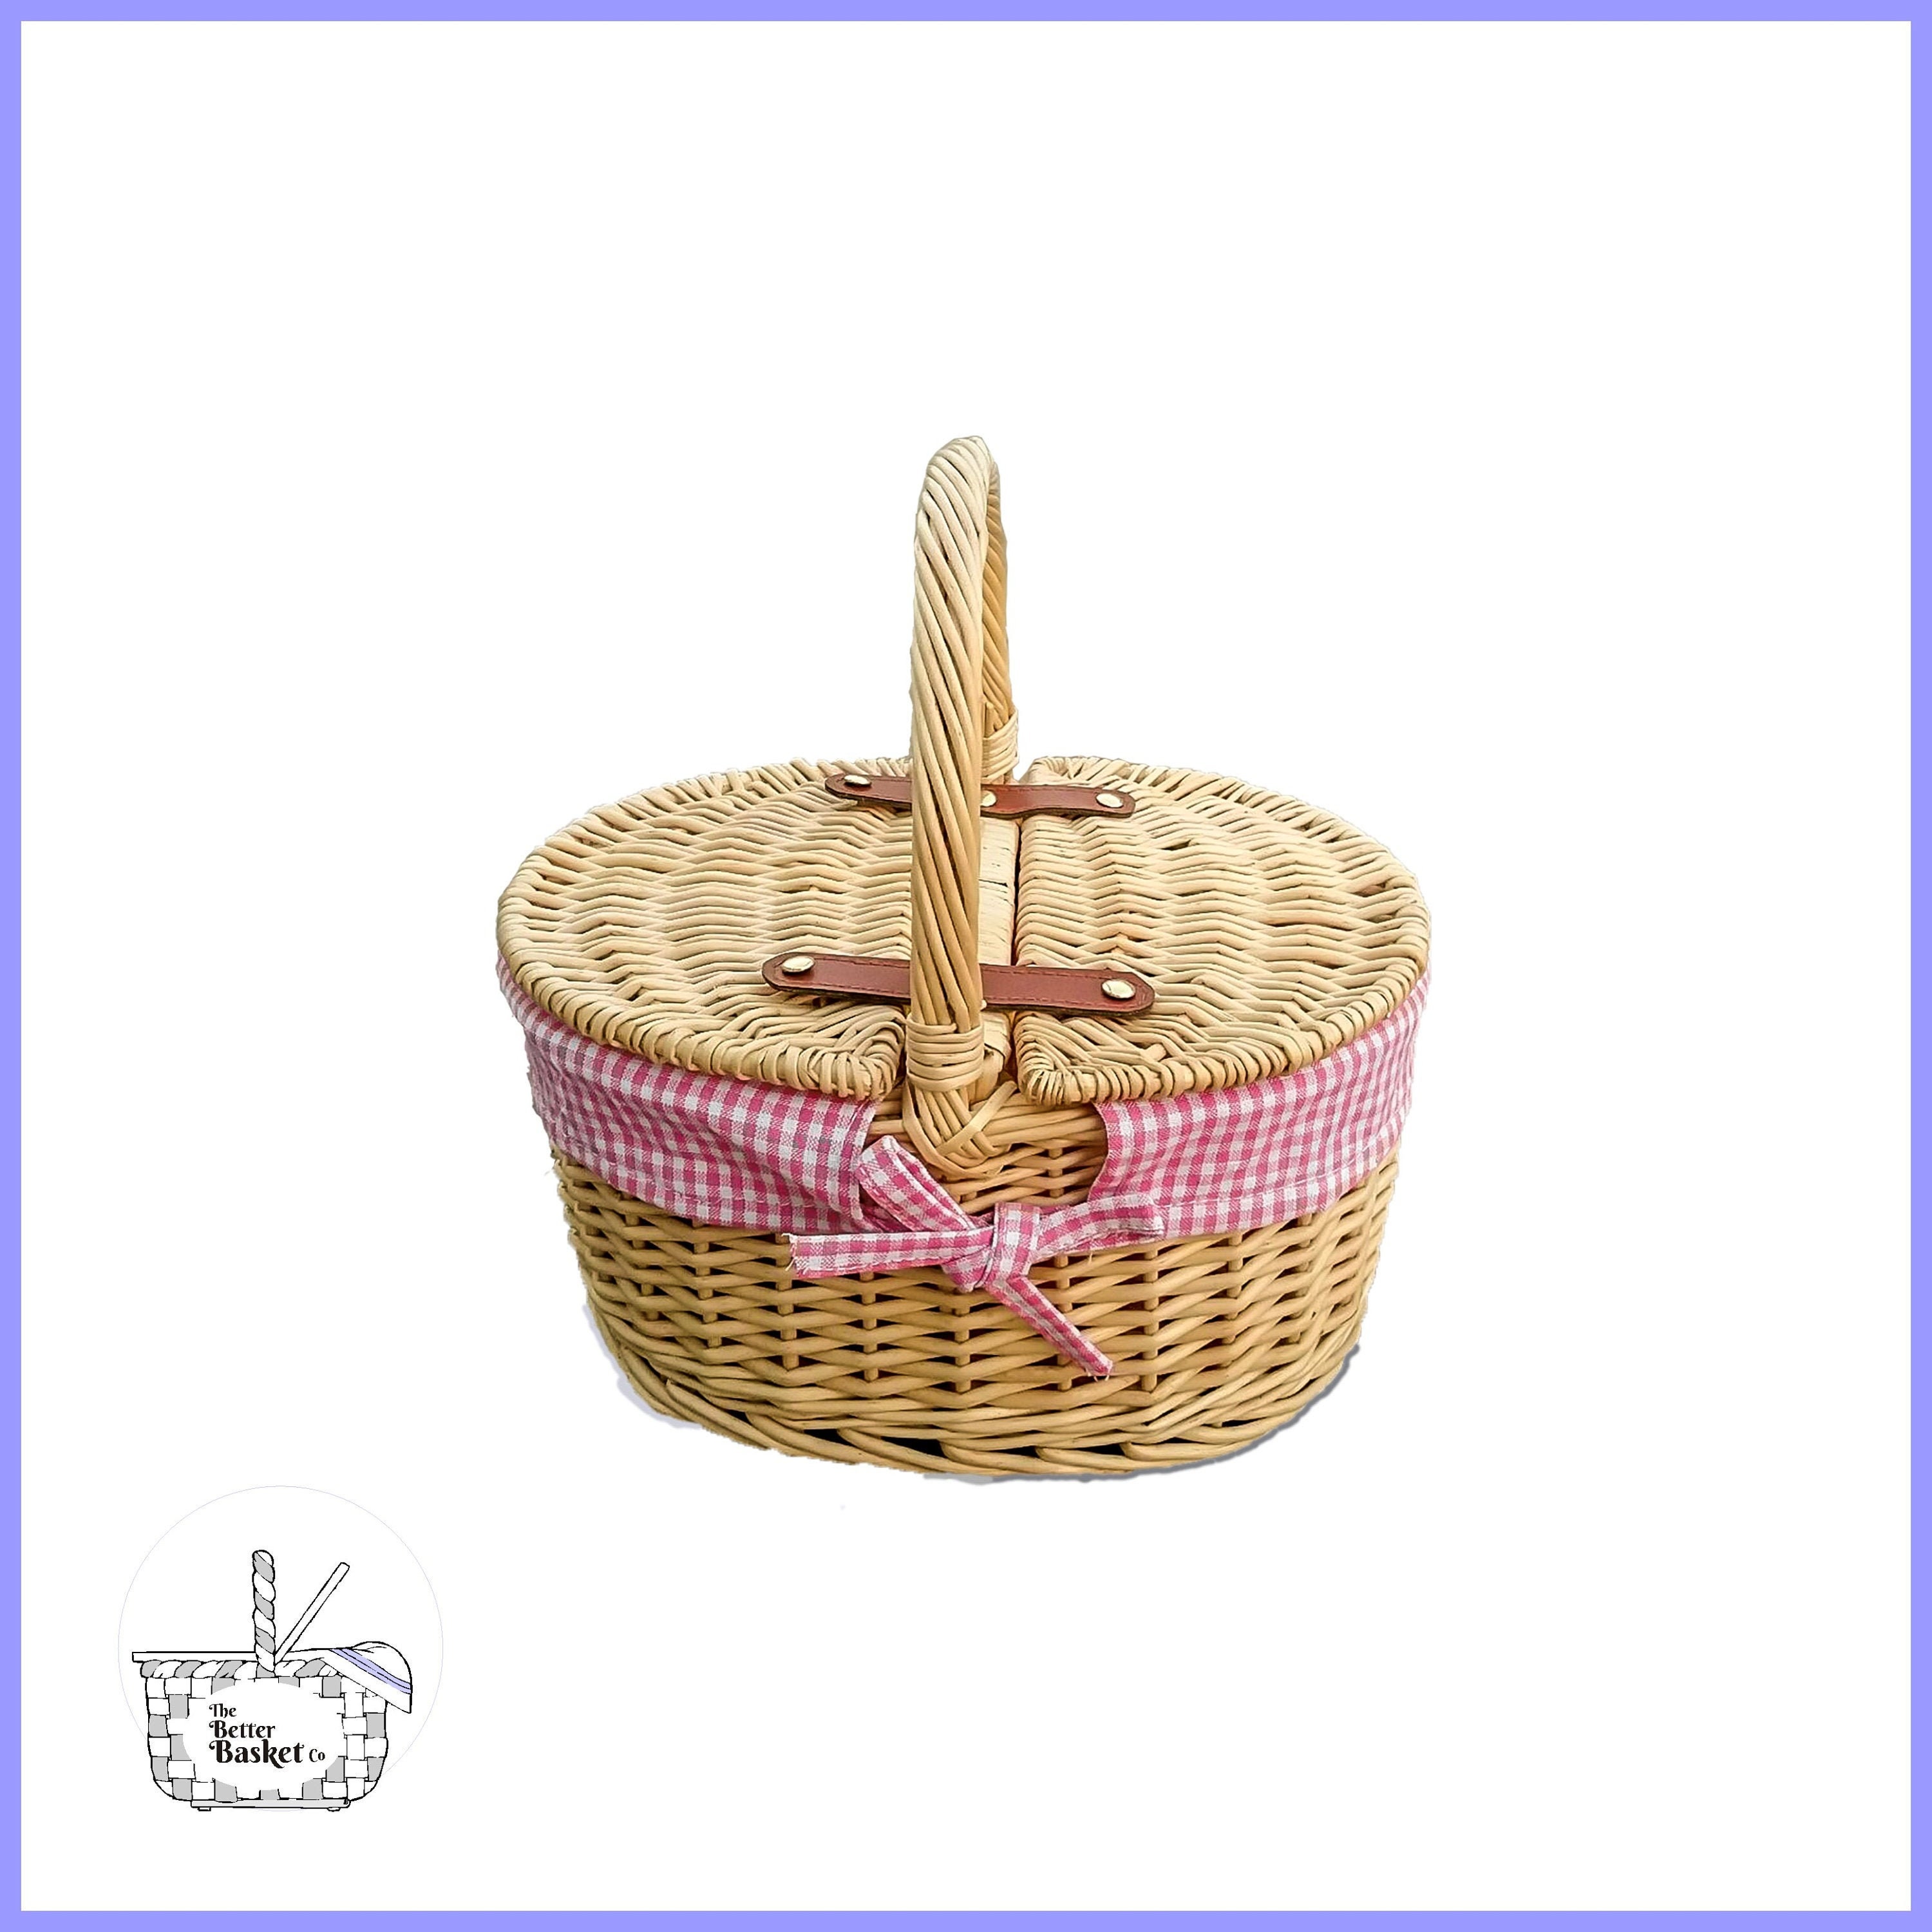  Gadpiparty 24 Pcs Small Wooden Basket Mini Candy Woven Baskets  Mini Baskets Picnic Rattan Container Red Riding Hood Basket Sundries Basket  Mini Woven Candy Baskets Mini Handheld Baskets : Home 